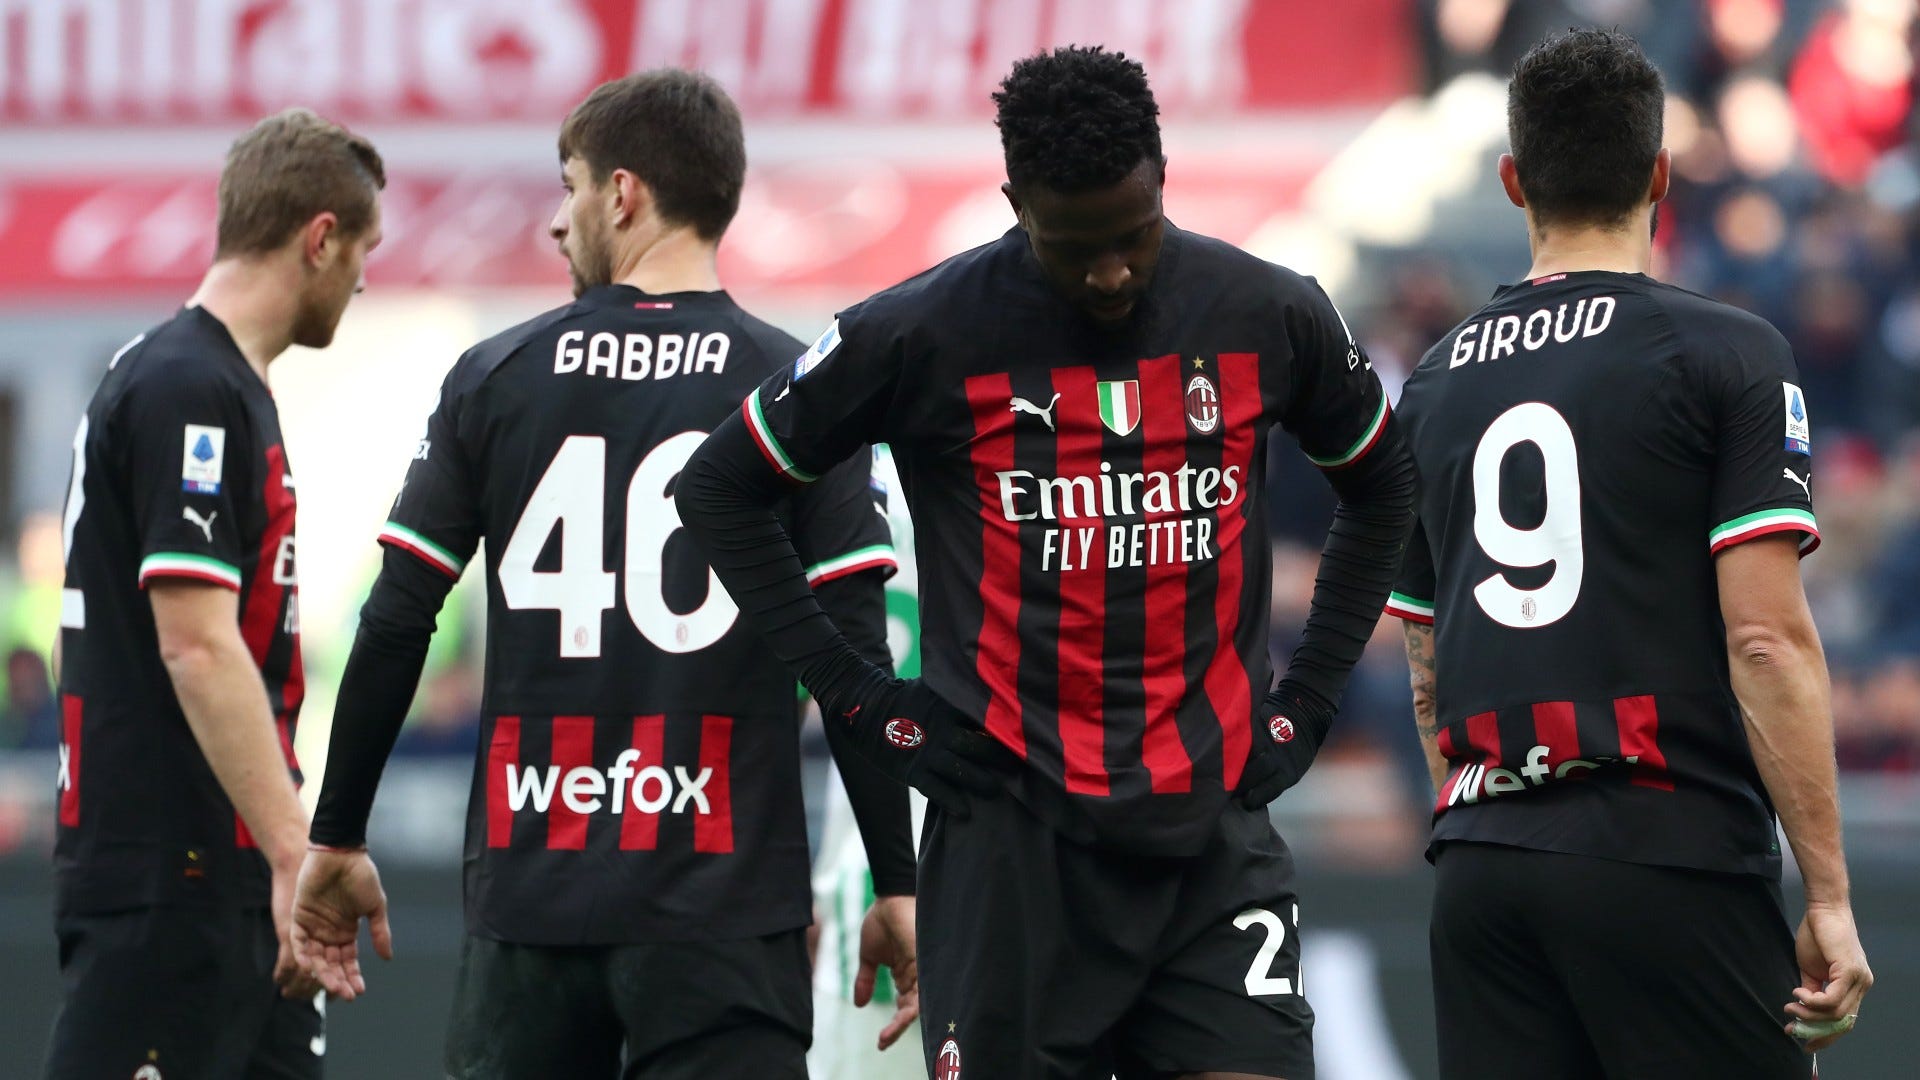 AC Milan hit 26-year low at San Siro in five-goal shocker against Sassuolo in Serie A